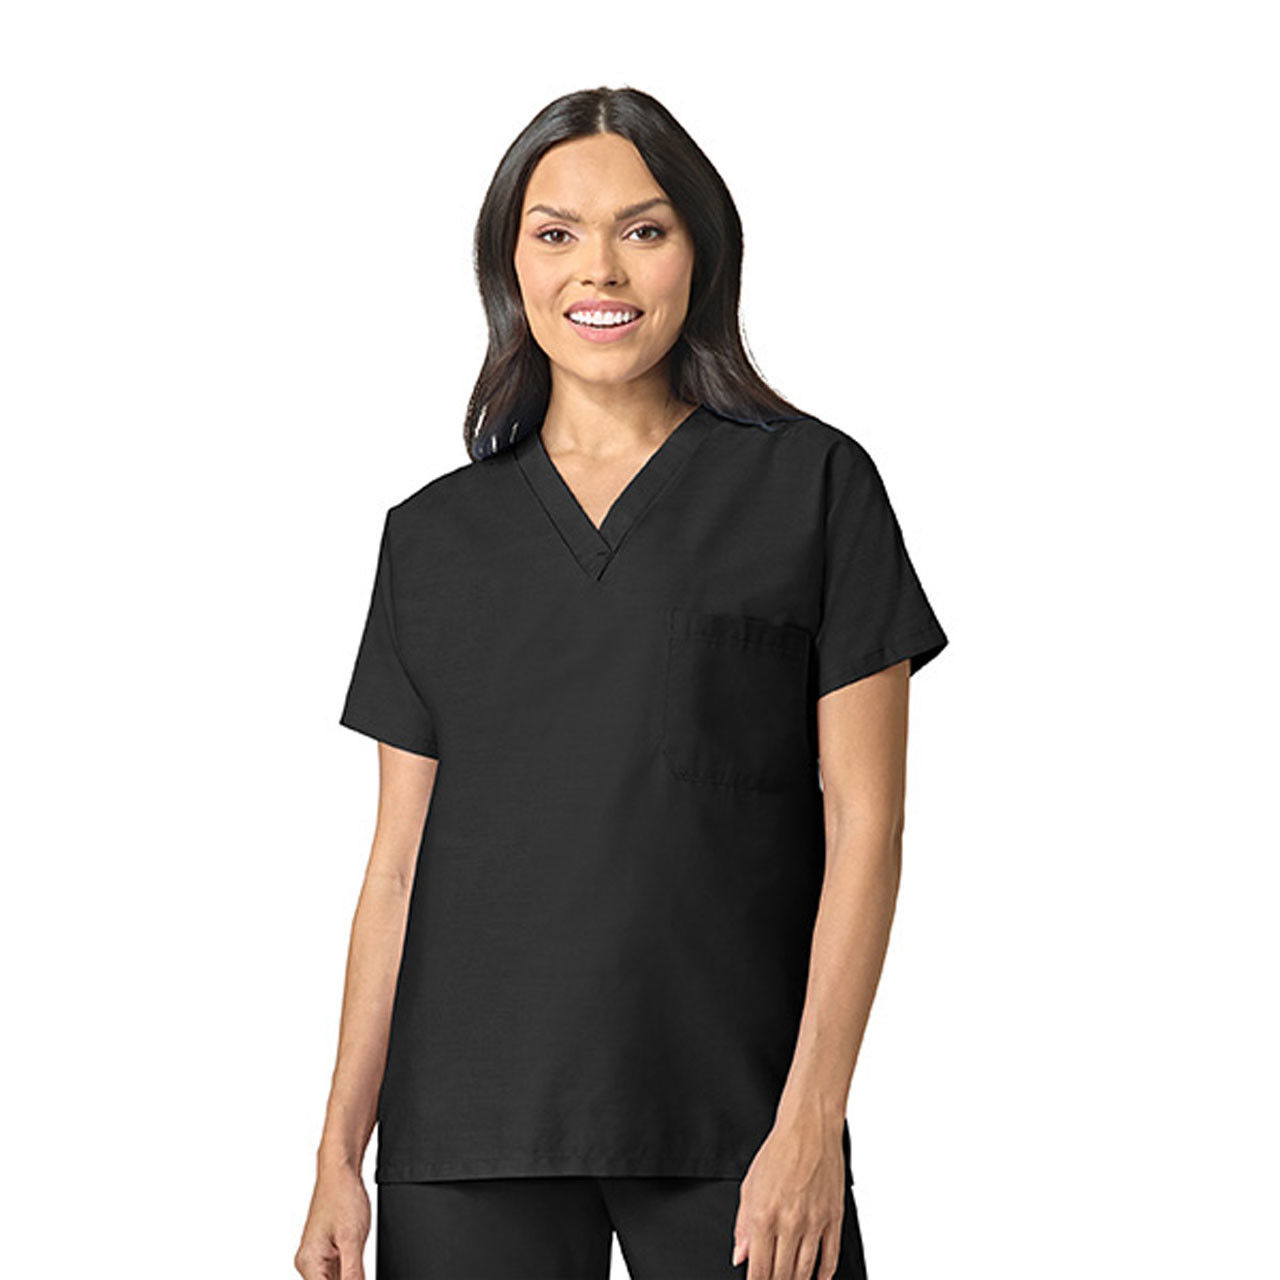 What kind of sleeve does the Black Scrub Tops feature?